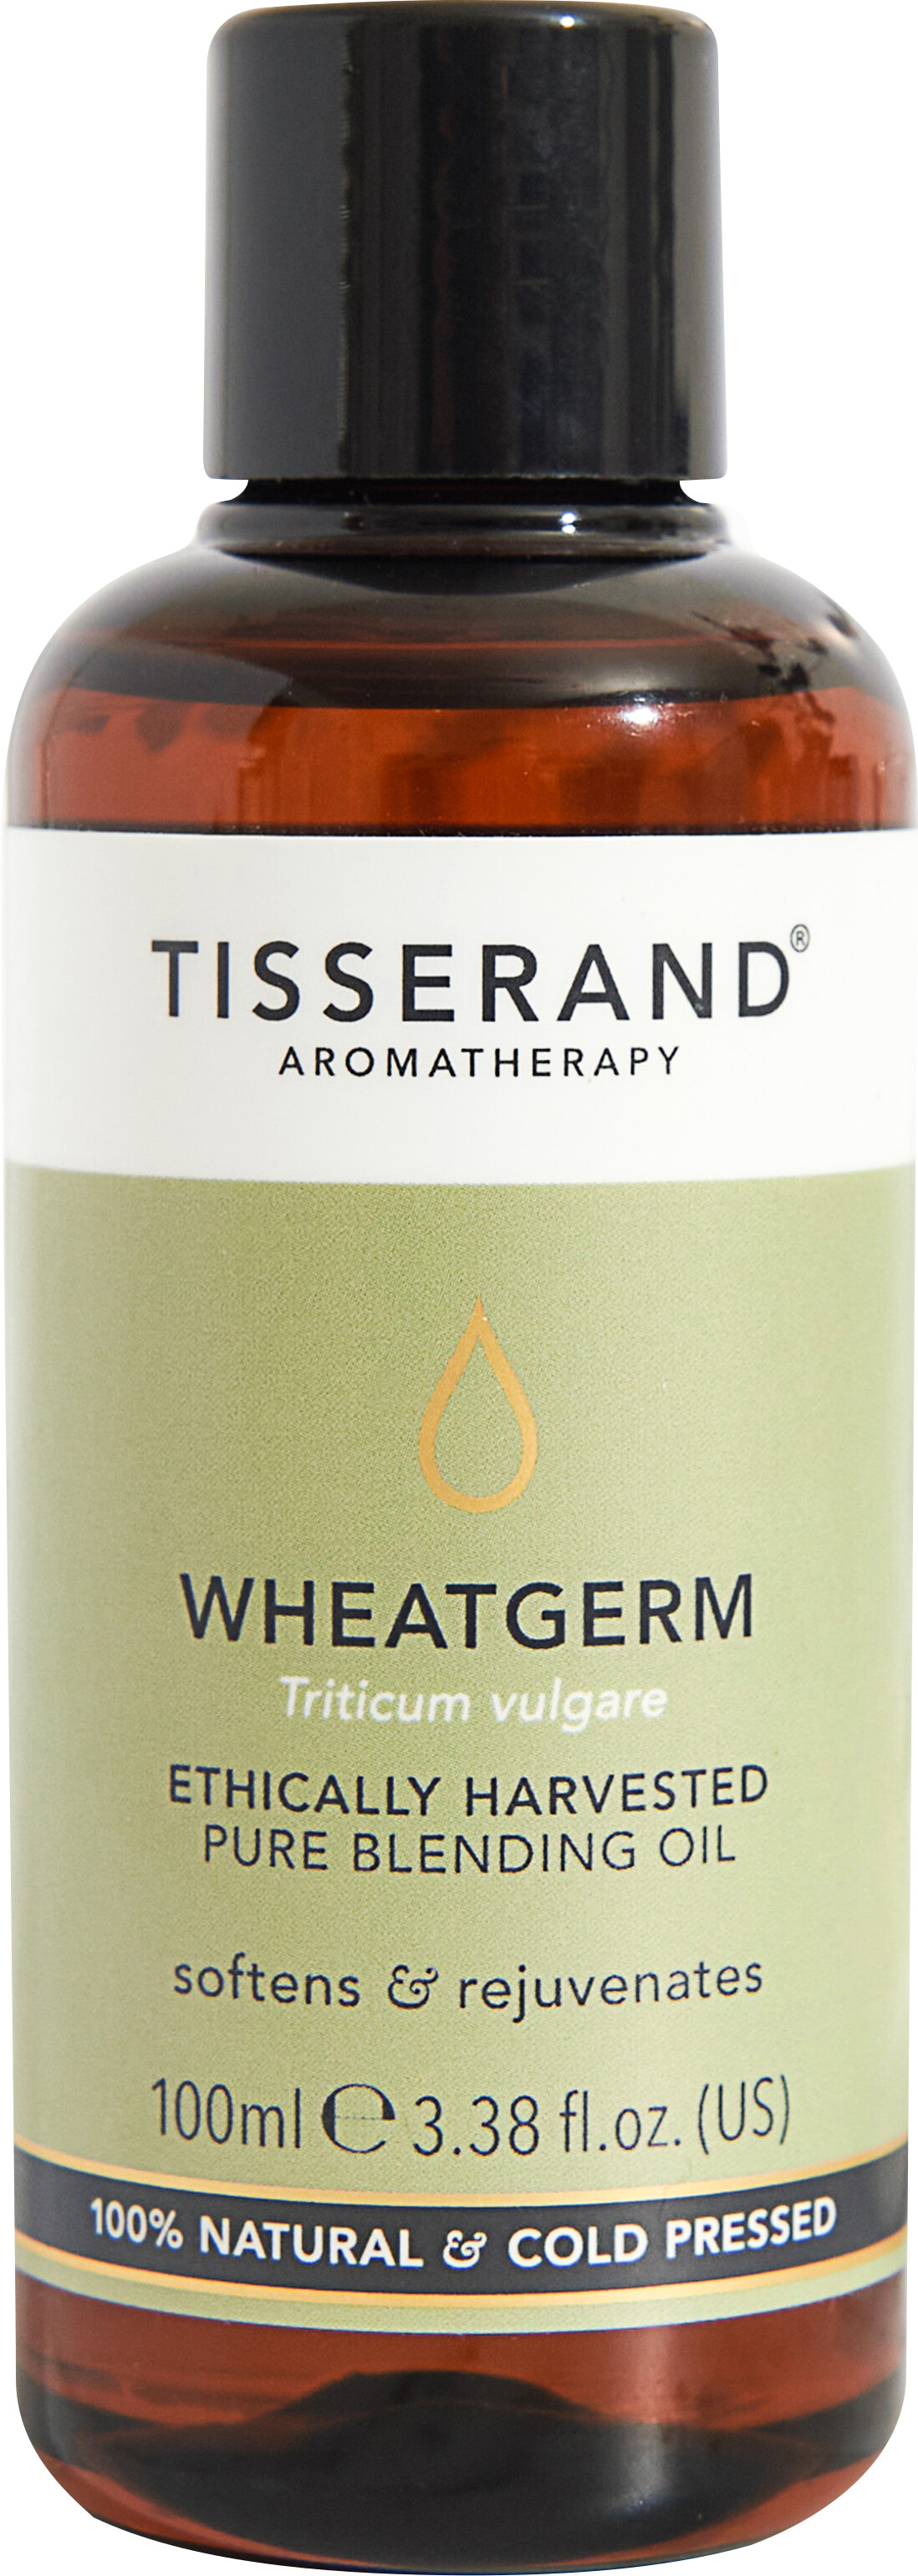 Tisserand Aromatherapy Wheatgerm Ethically Harvested Pure Blending Oil 100ml